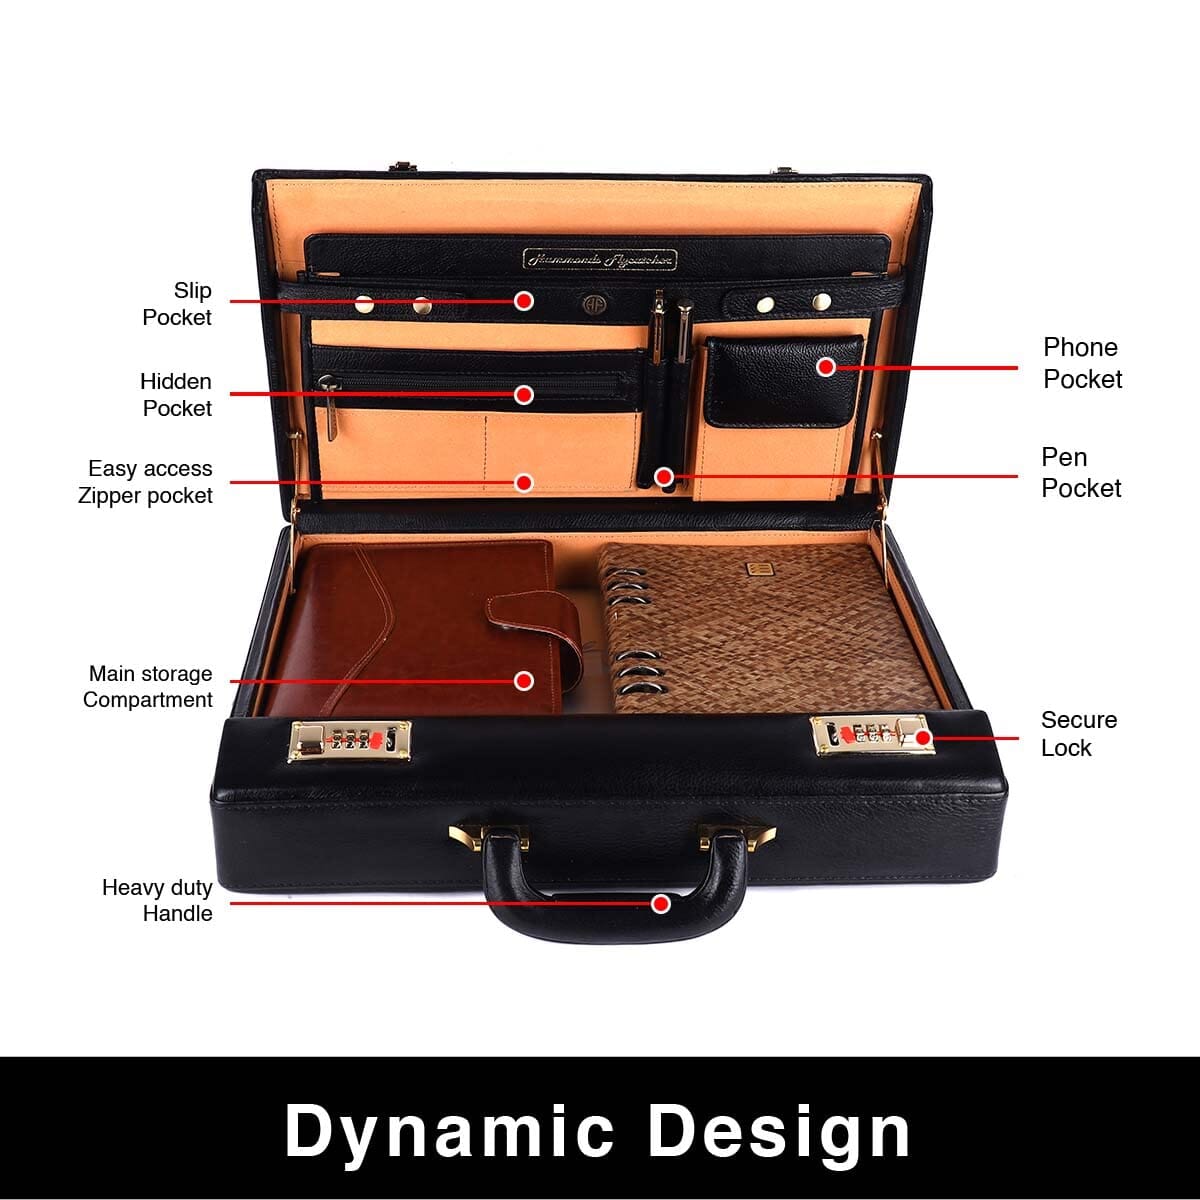 Black Office Suitcase Briefcase - The Tool Store